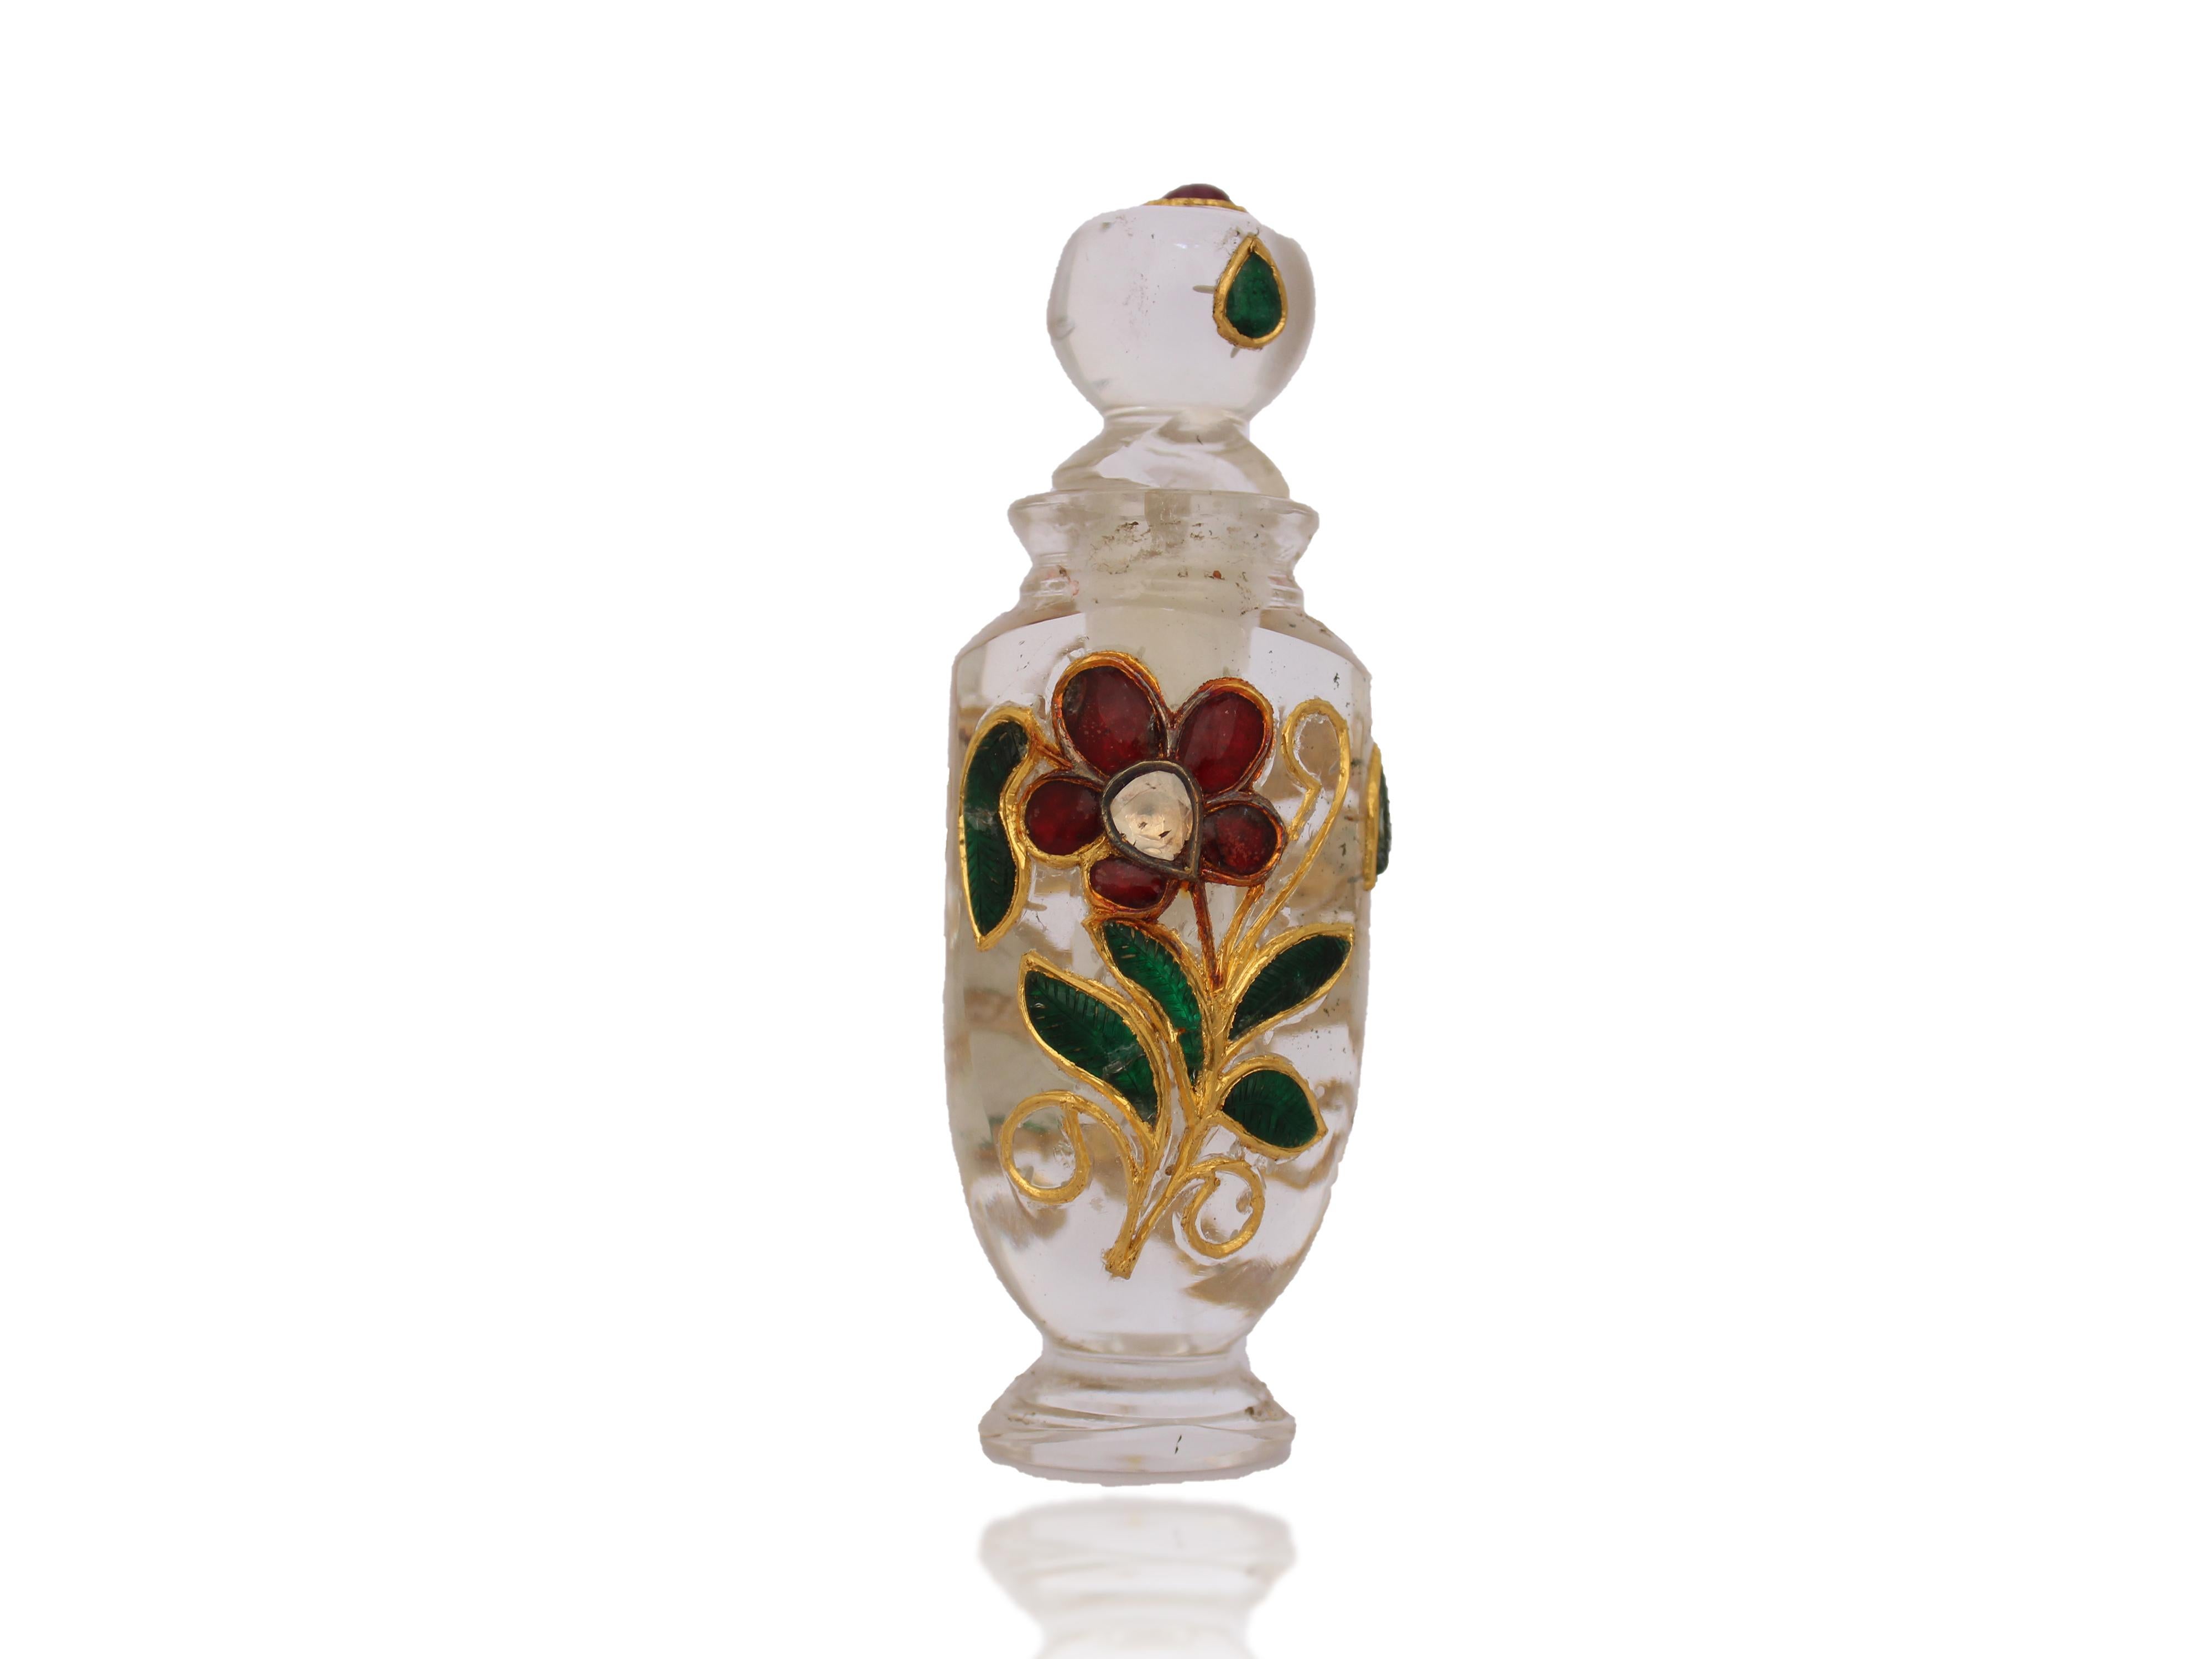 A Mughal style perfume bottle (Itradani), Each side of the bottle is inlaid with 24K gold encrusted with carved petal in green and flower petals in rubies and diamonds, the stopper at the is rounded and attached itself to the bottle in a firm